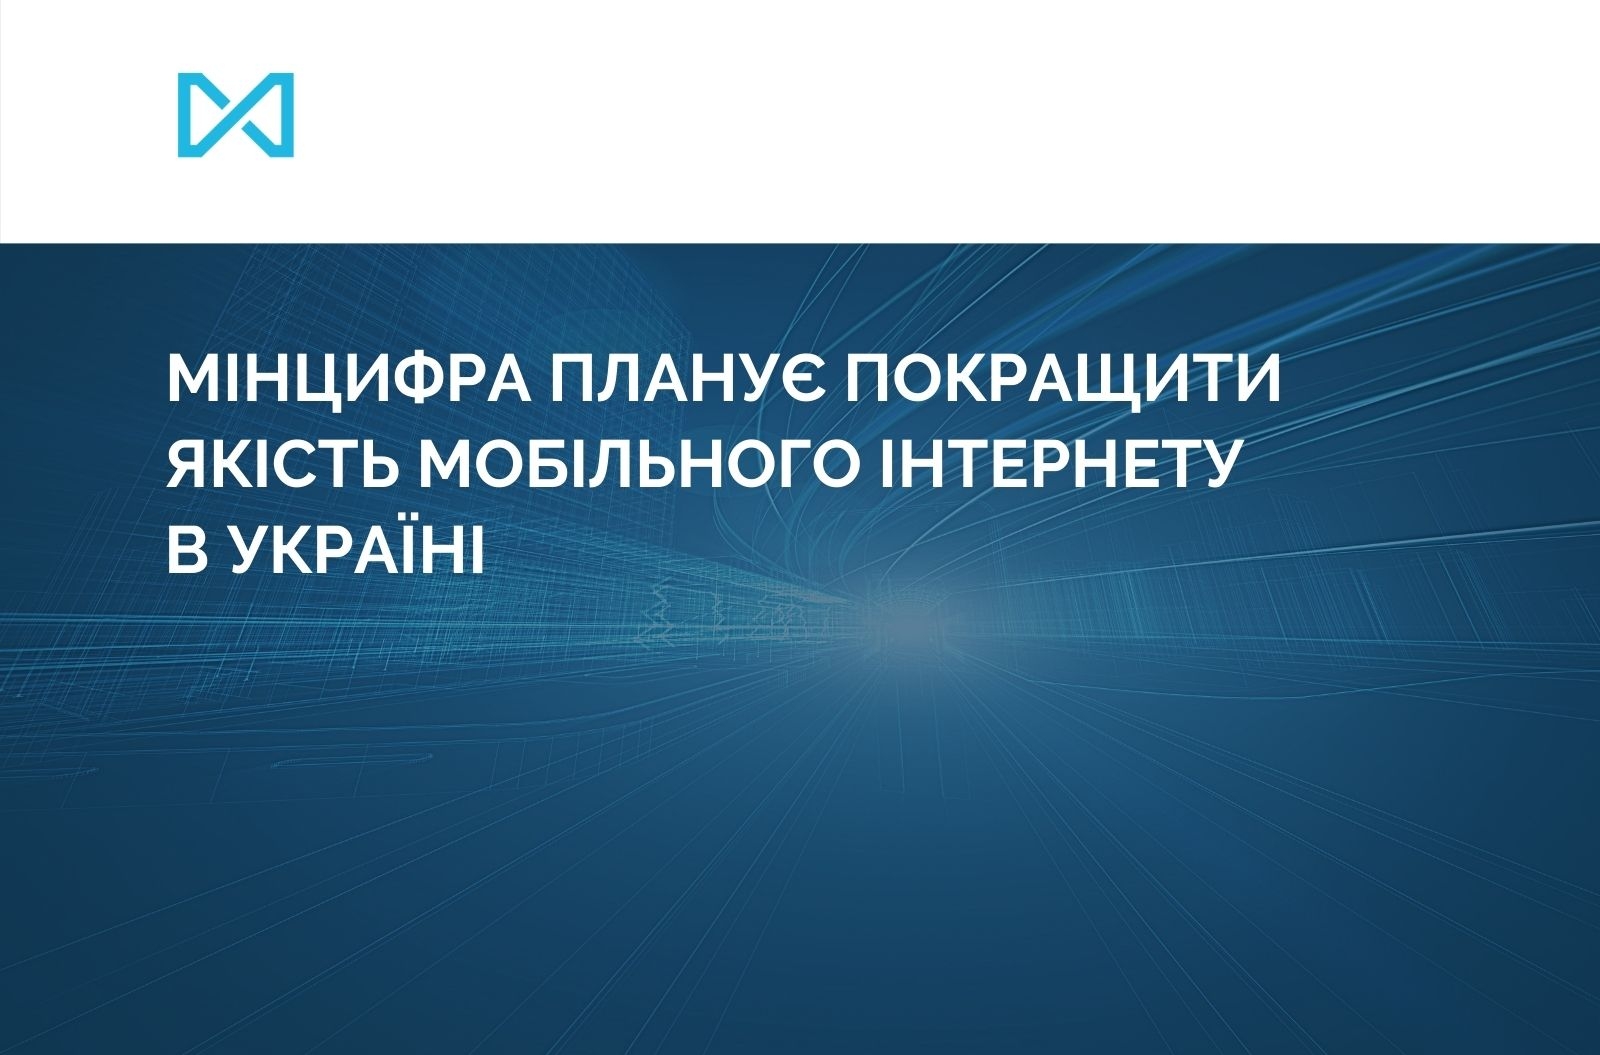 The Ministry of Digital Transformation plans to improve the quality of mobile Internet in Ukraine